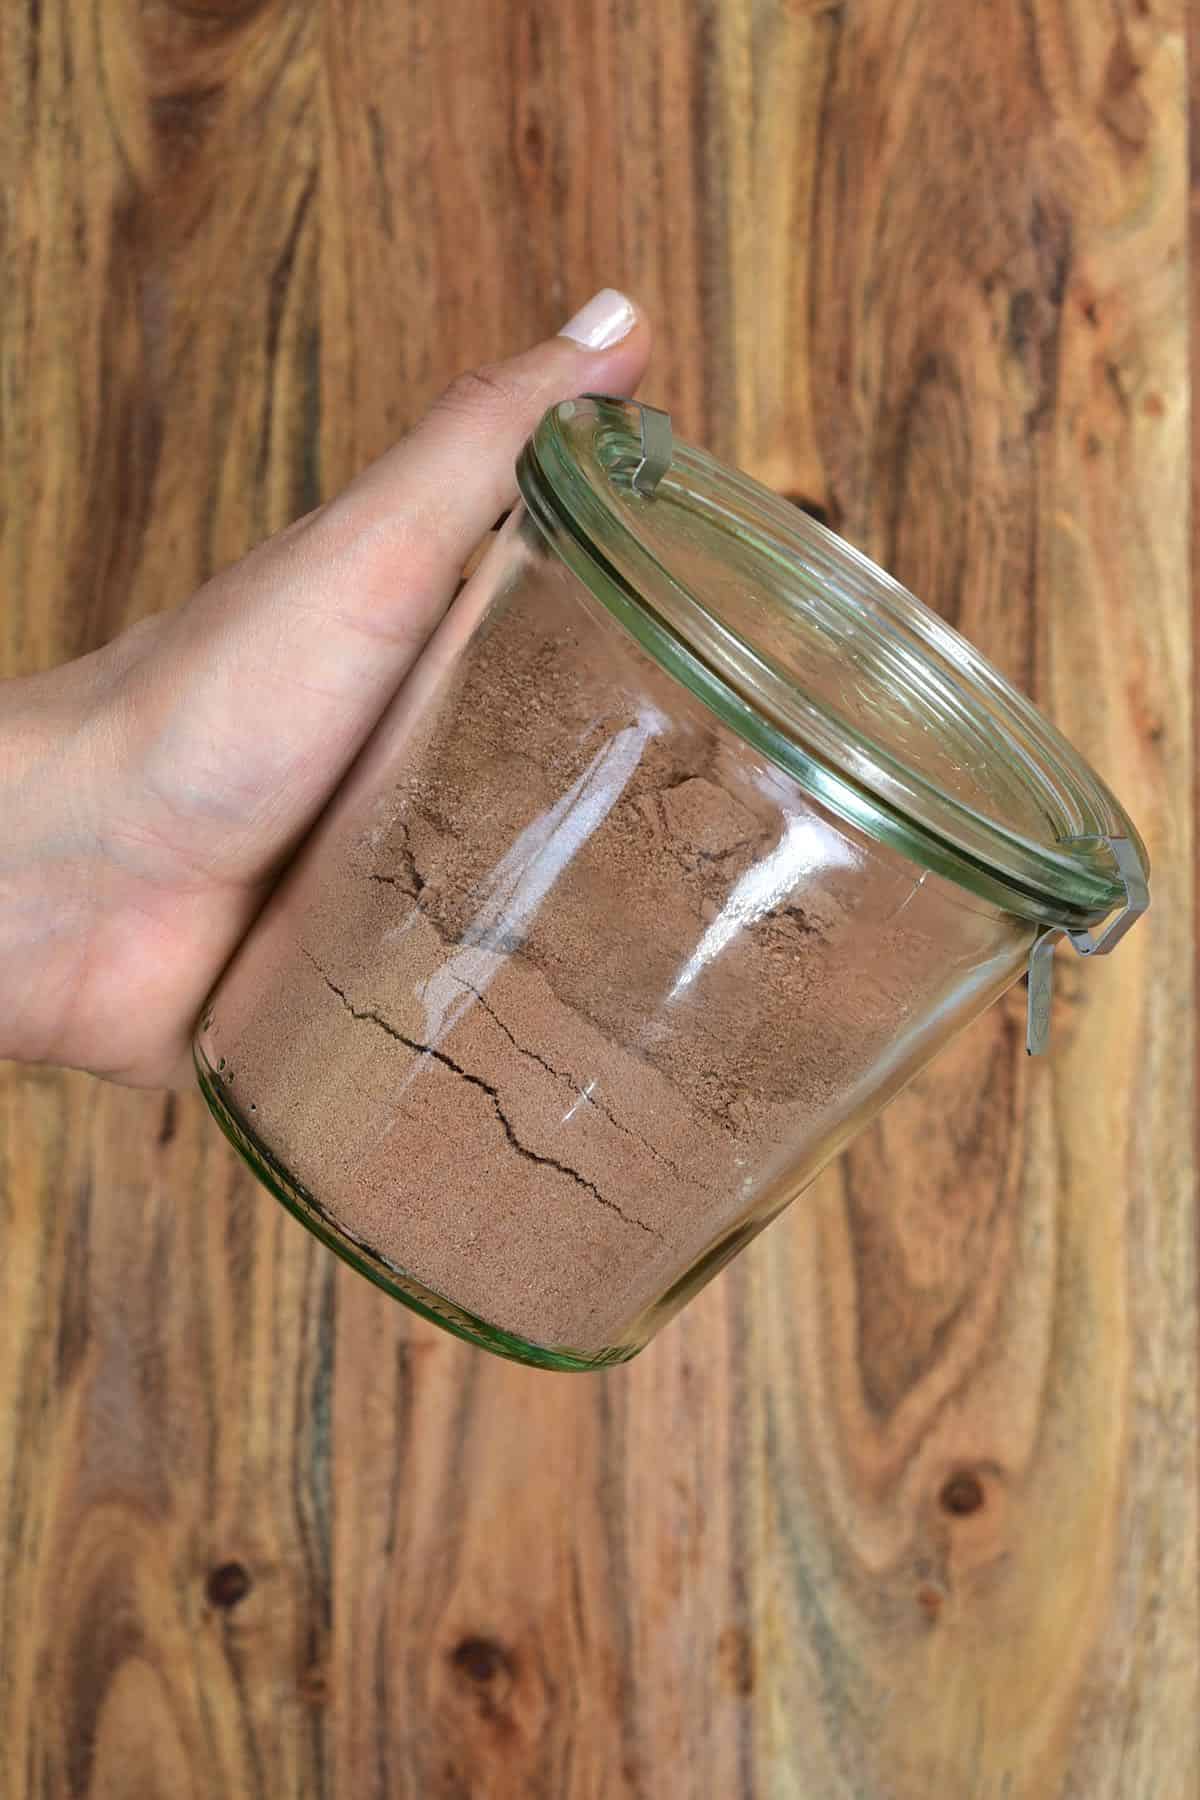 A jar filled with hot chocolate mix